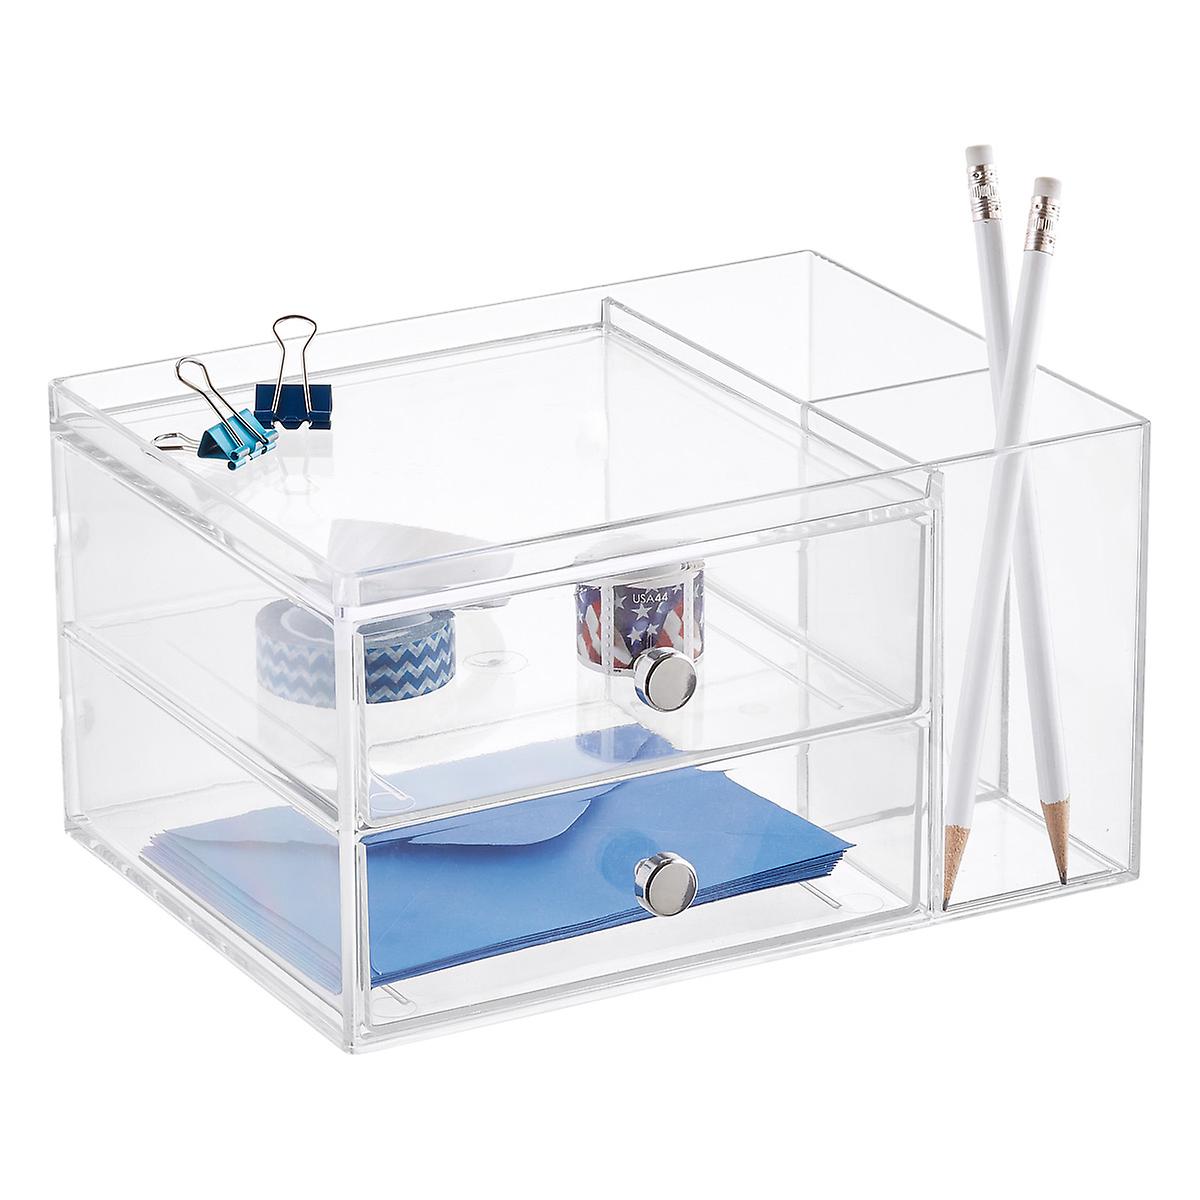 2 Drawer Desk Organizer The Container Store